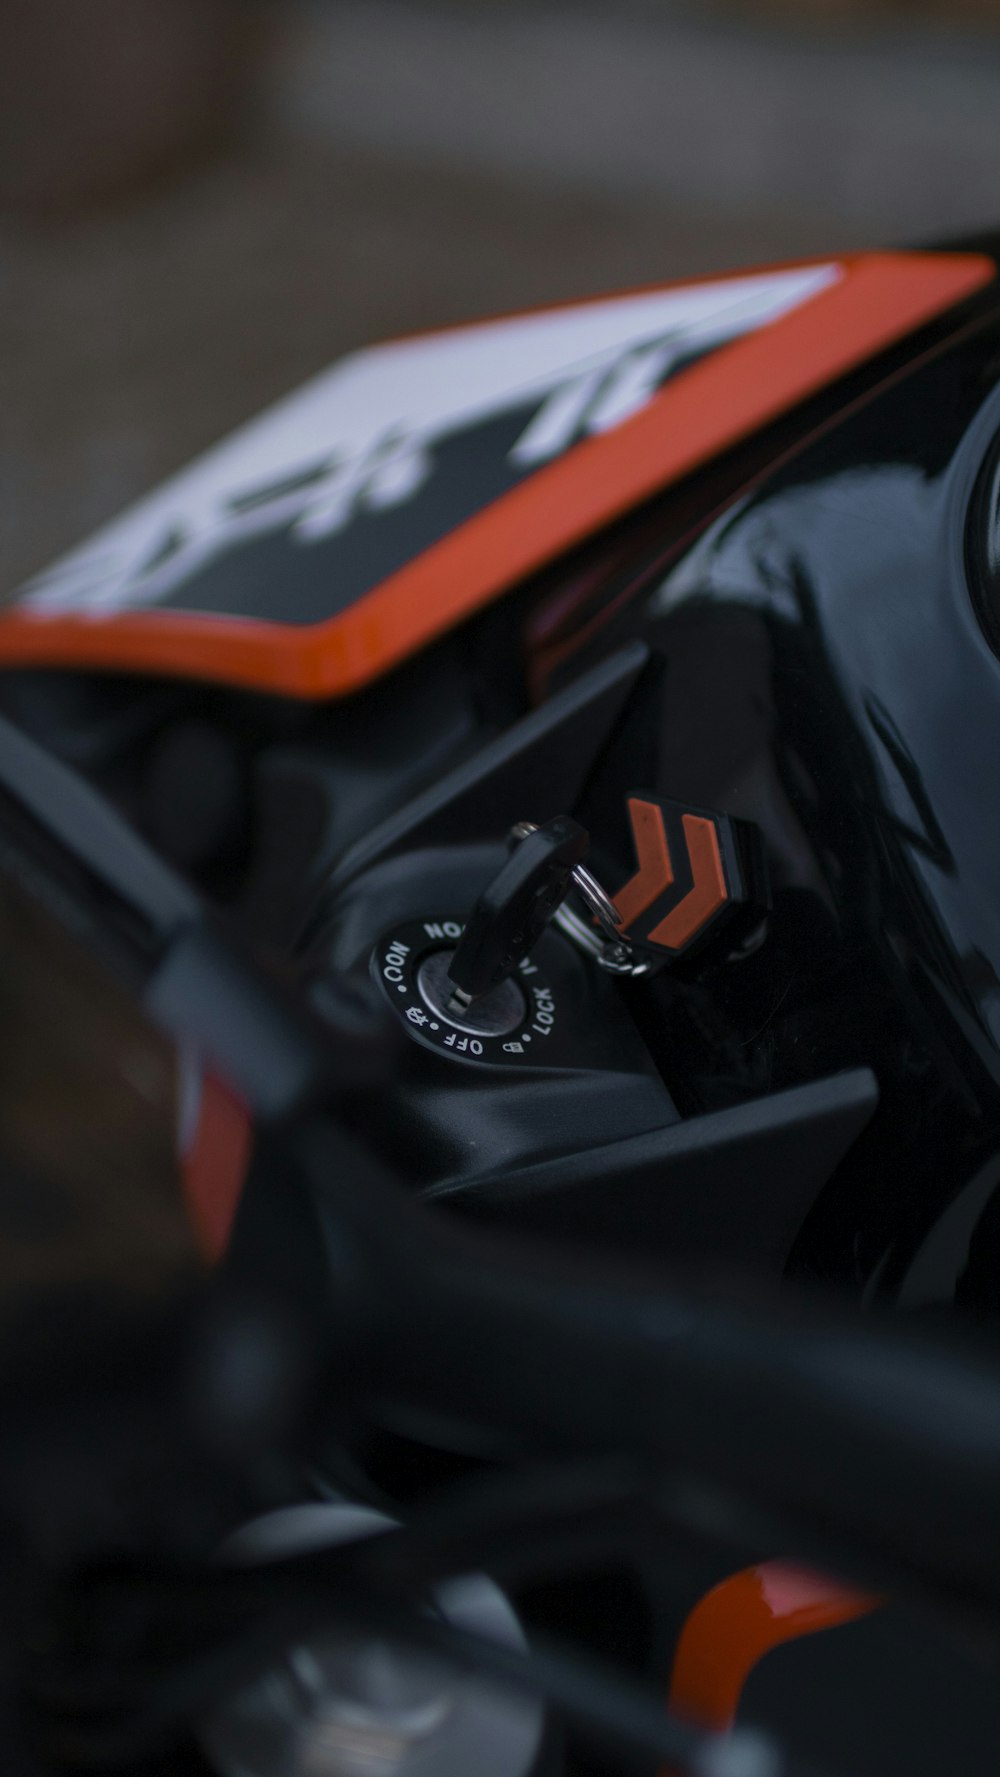 a close up of a motorcycle with a black and orange frame